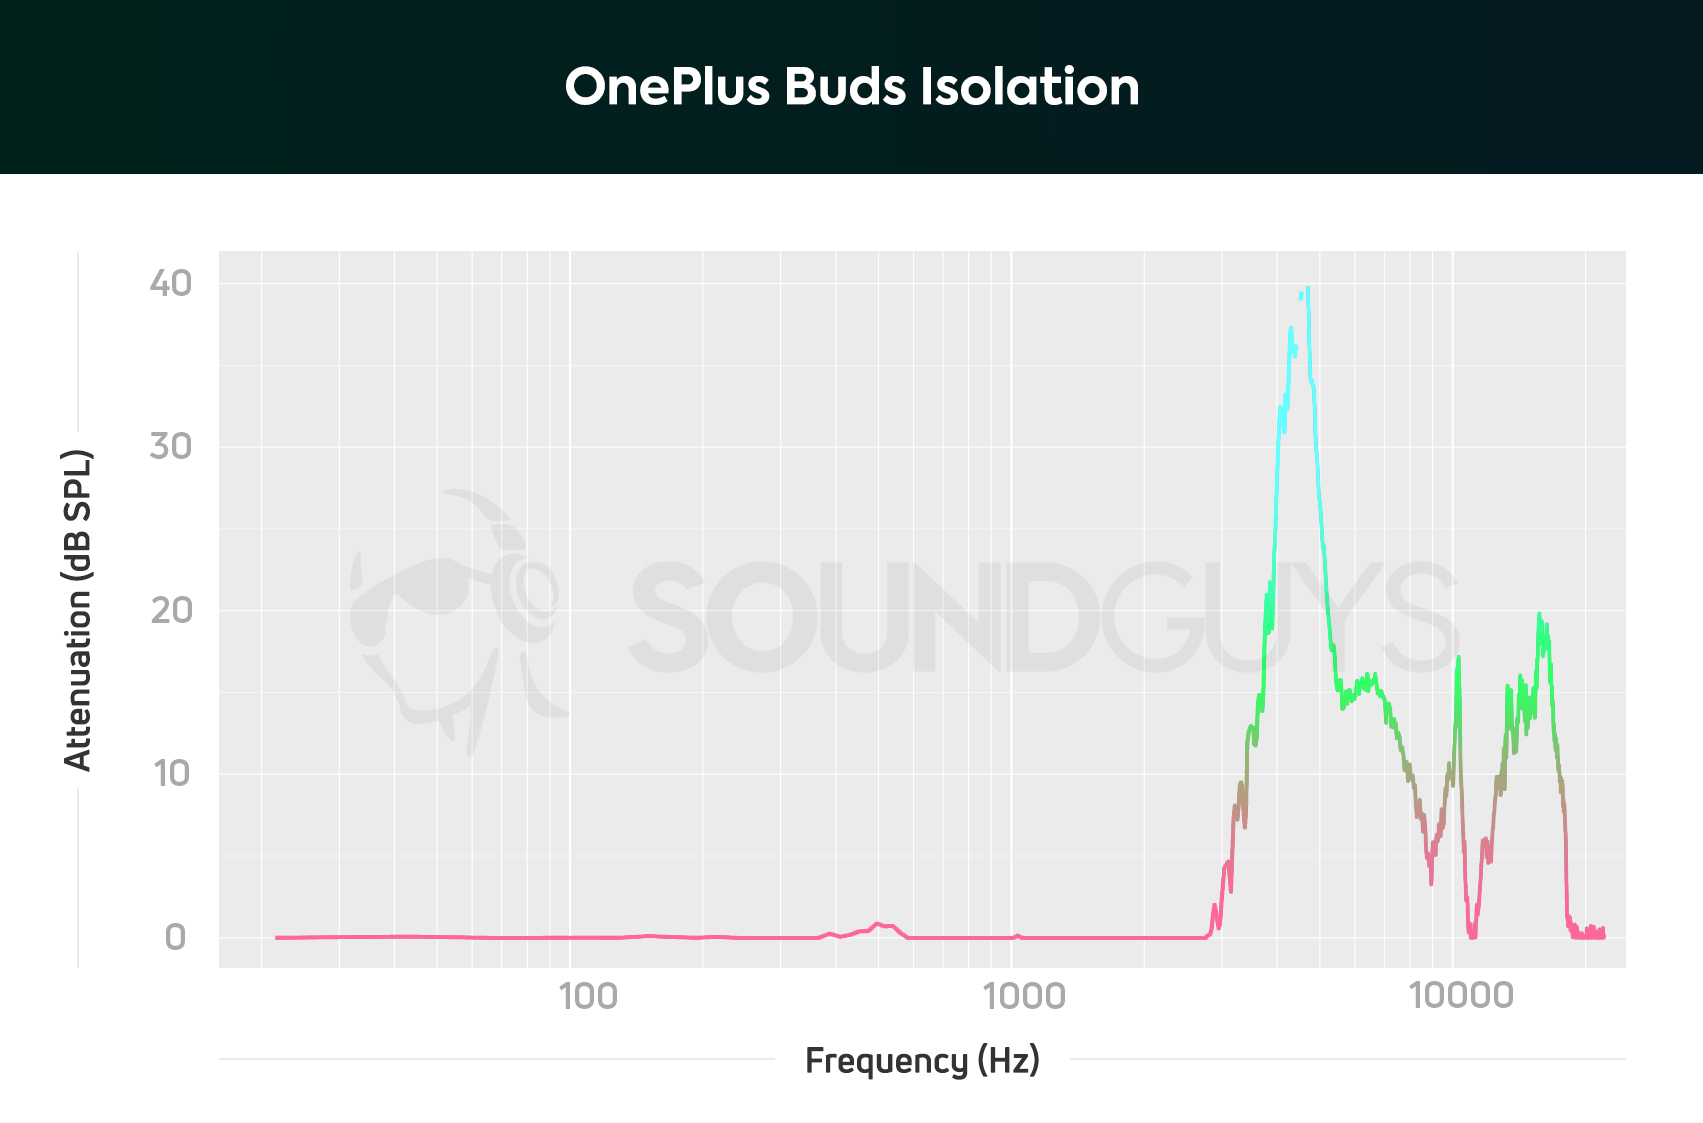 A chart depicting the isolation performance of the OnePlus Buds, which ineffectively block out low and midrange frequencies.